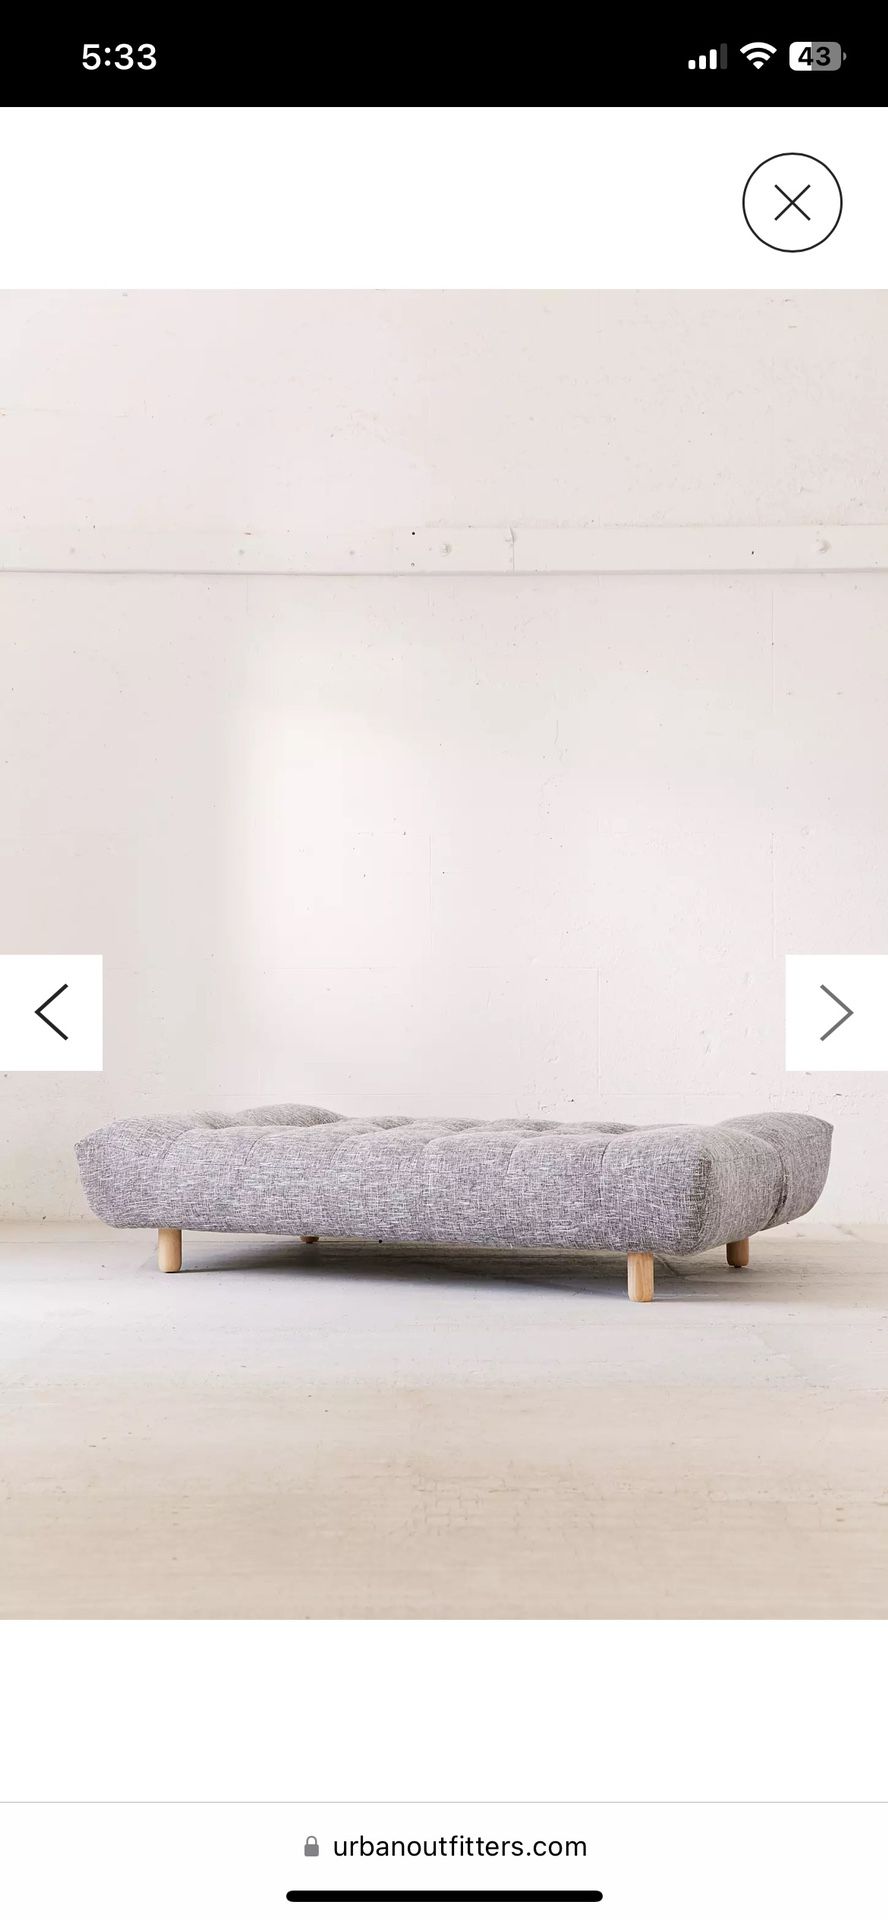 MOVING SALE - Urban Outfitters Winslow Armless Sleeper Sofa